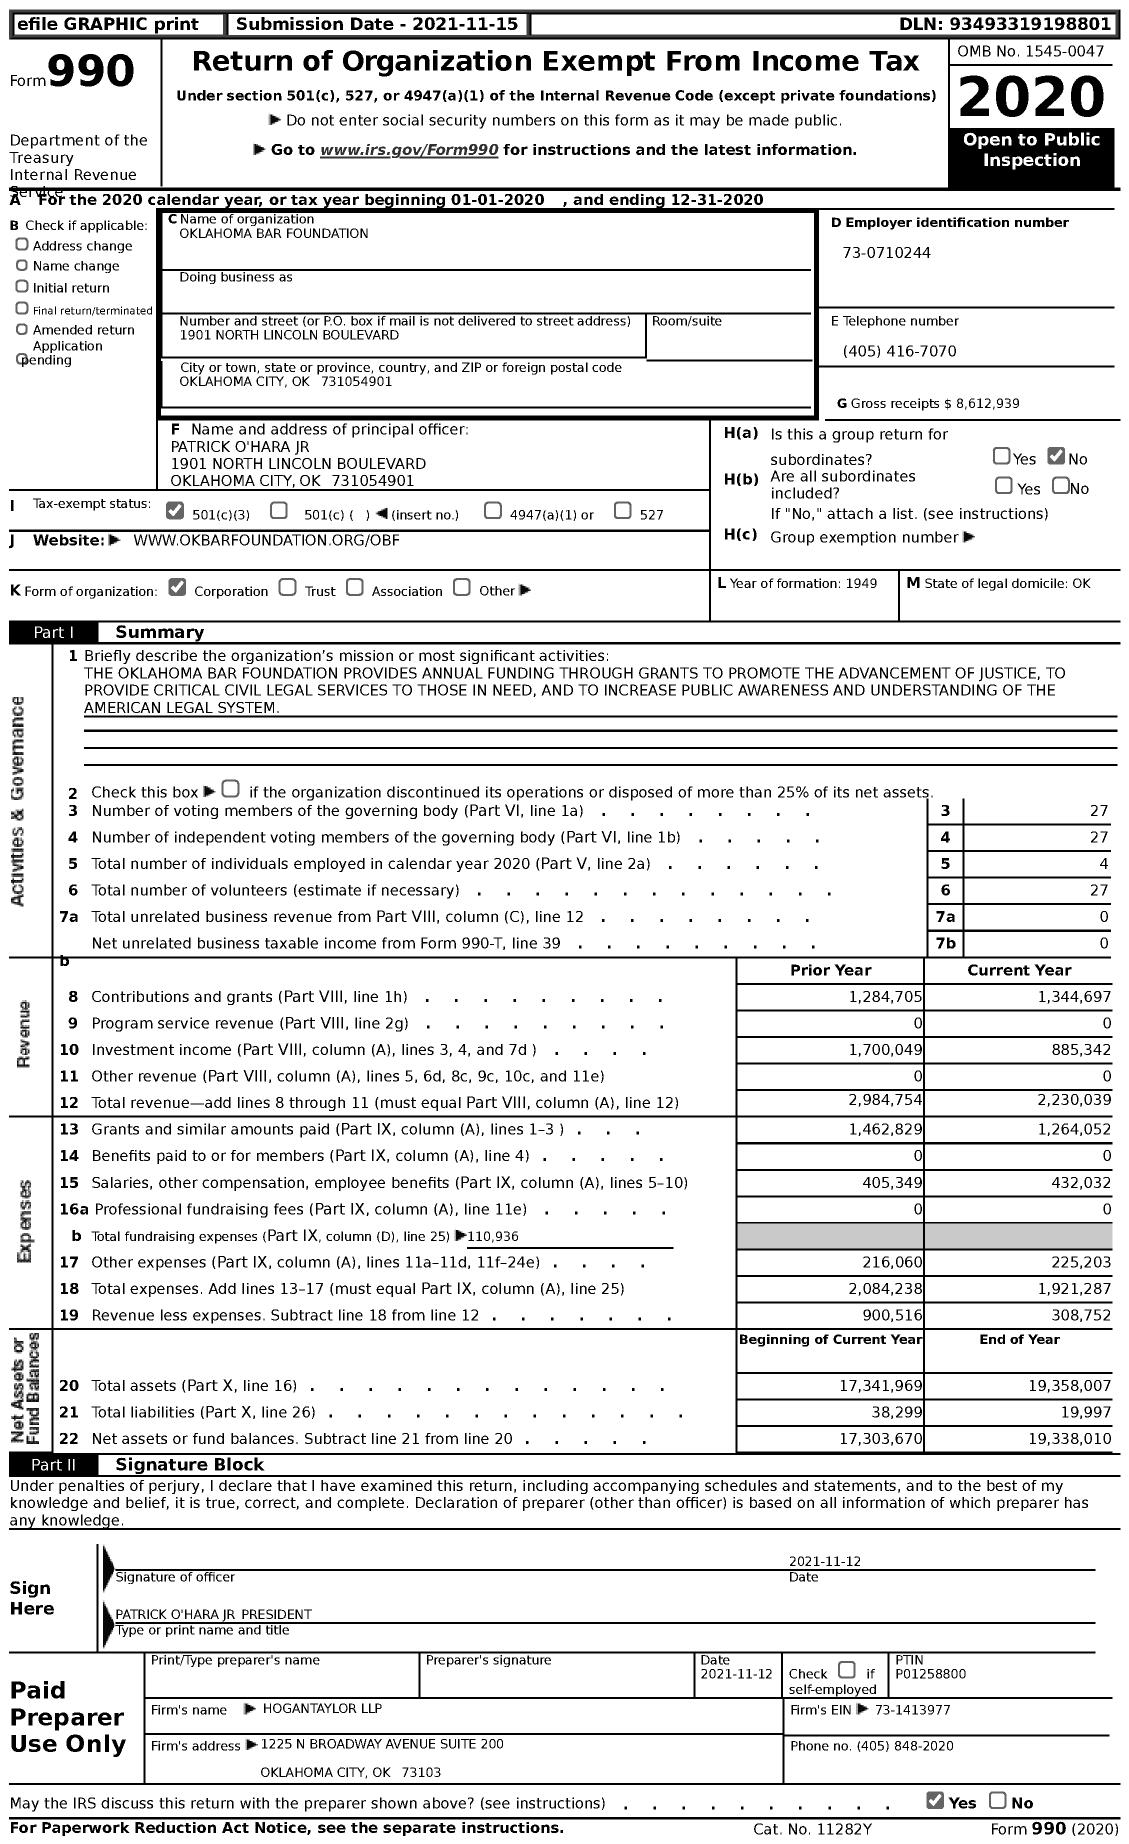 Image of first page of 2020 Form 990 for Oklahoma Bar Foundation (OBF)